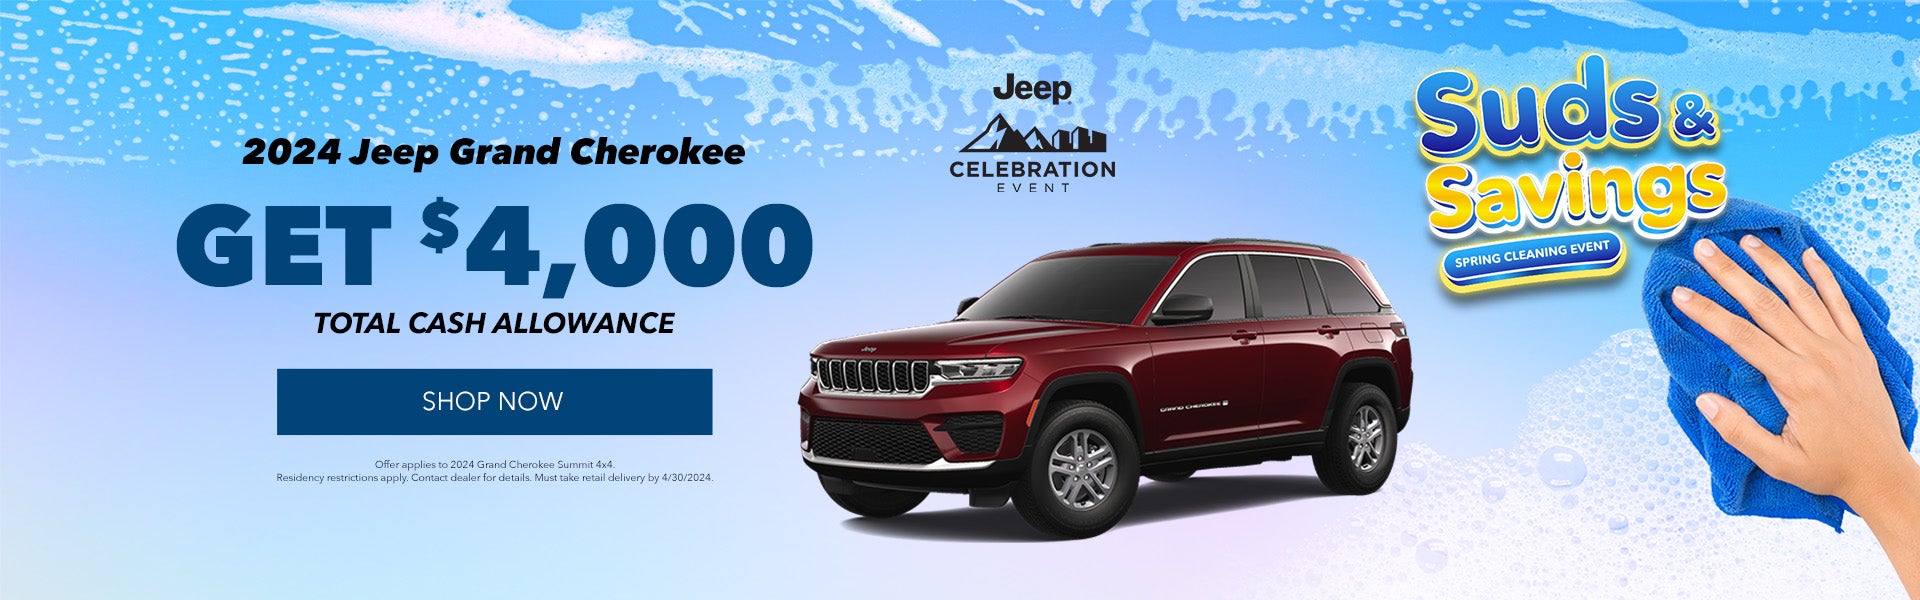 2024 Jeep grand Cherokee April Offers